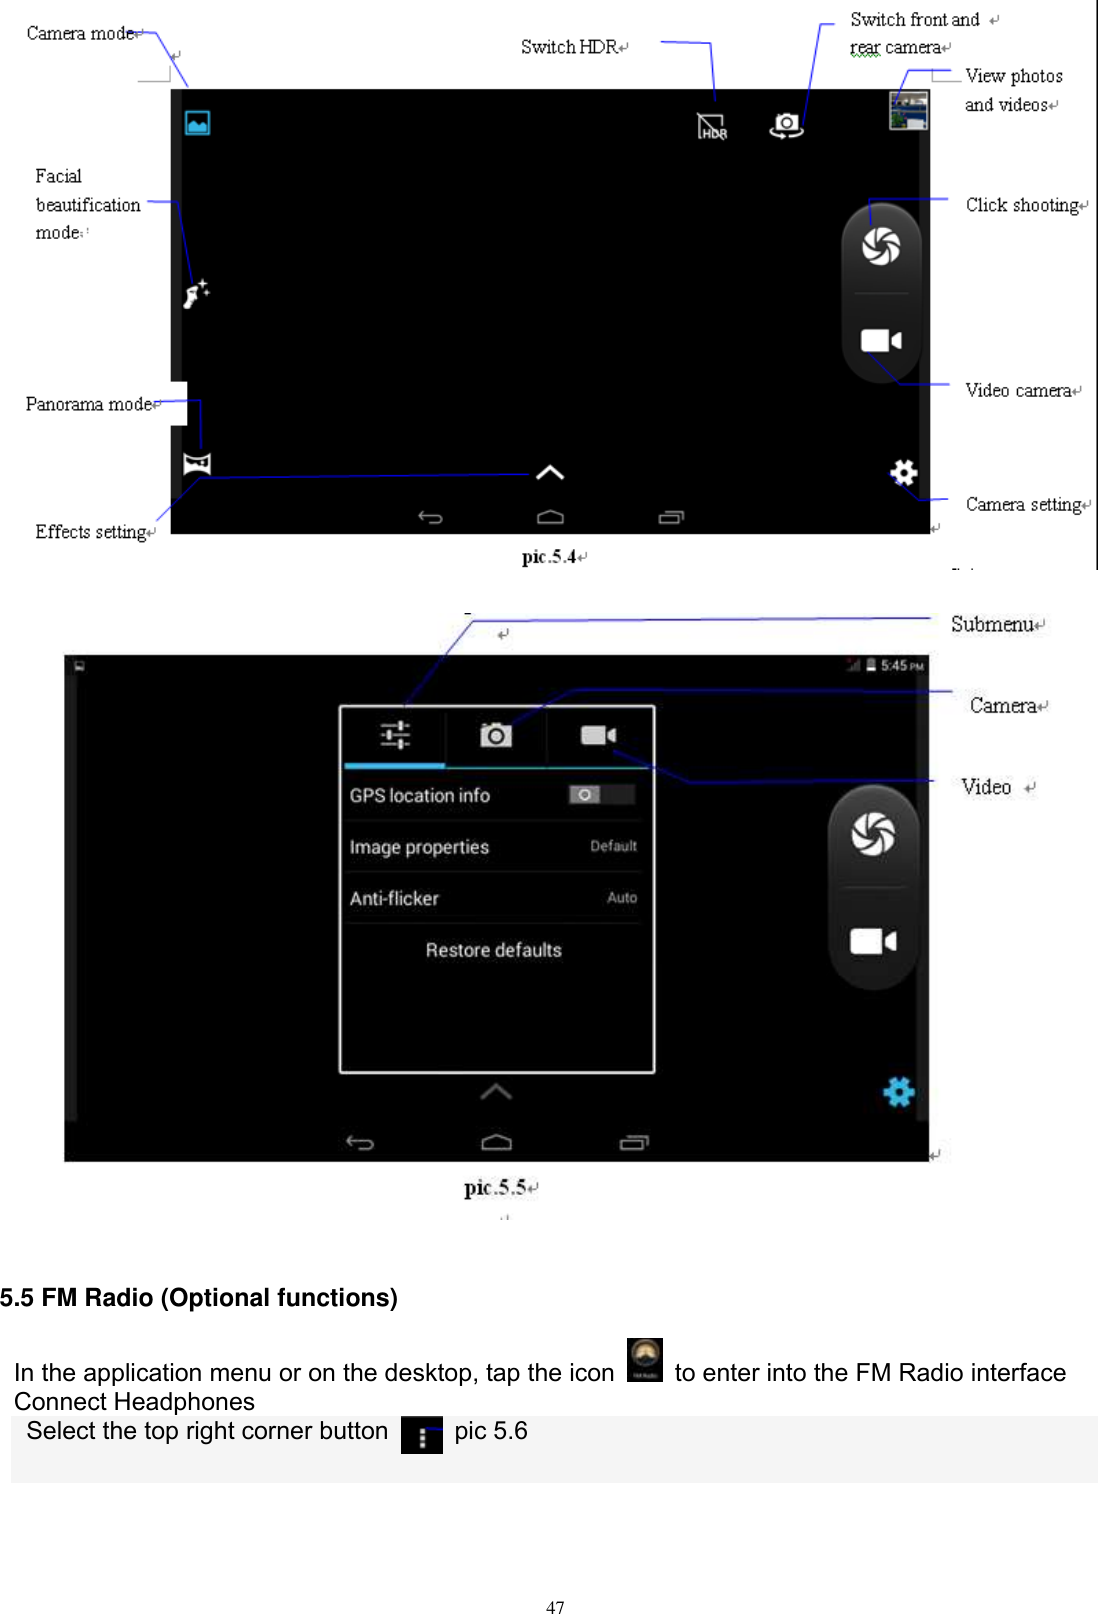      47     5.5 FM Radio (Optional functions) In the application menu or on the desktop, tap the icon    to enter into the FM Radio interface Connect Headphones   Select the top right corner button    pic 5.6  